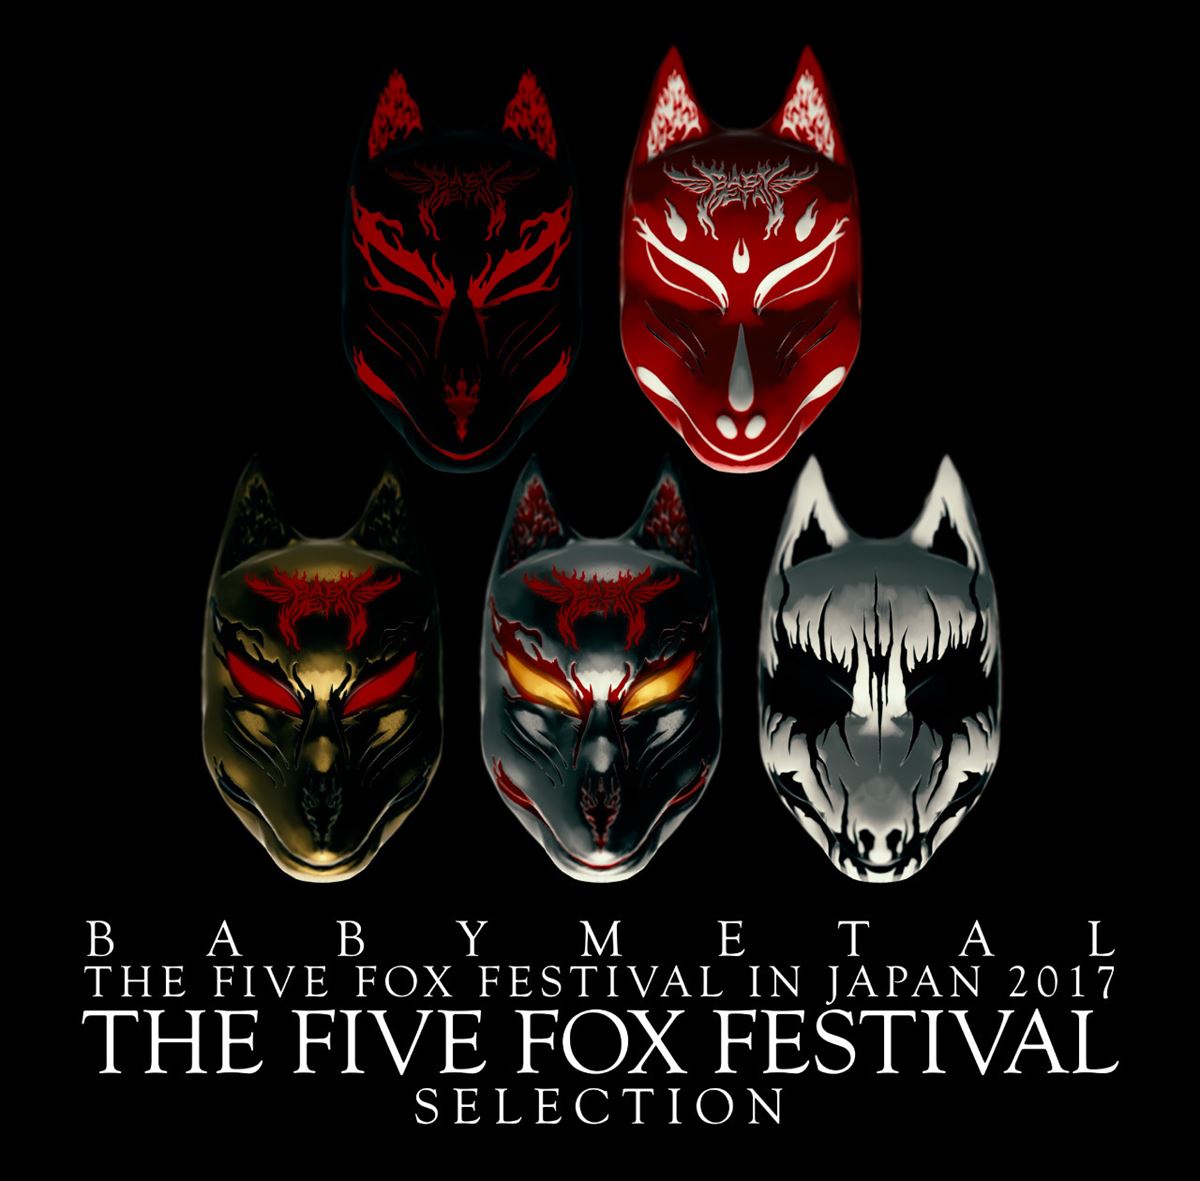 THE FOX FESTIVALS IN JAPAN 2017 - THE FIVE FOX FESTIVAL - SELECTION アナログ盤ジャケット